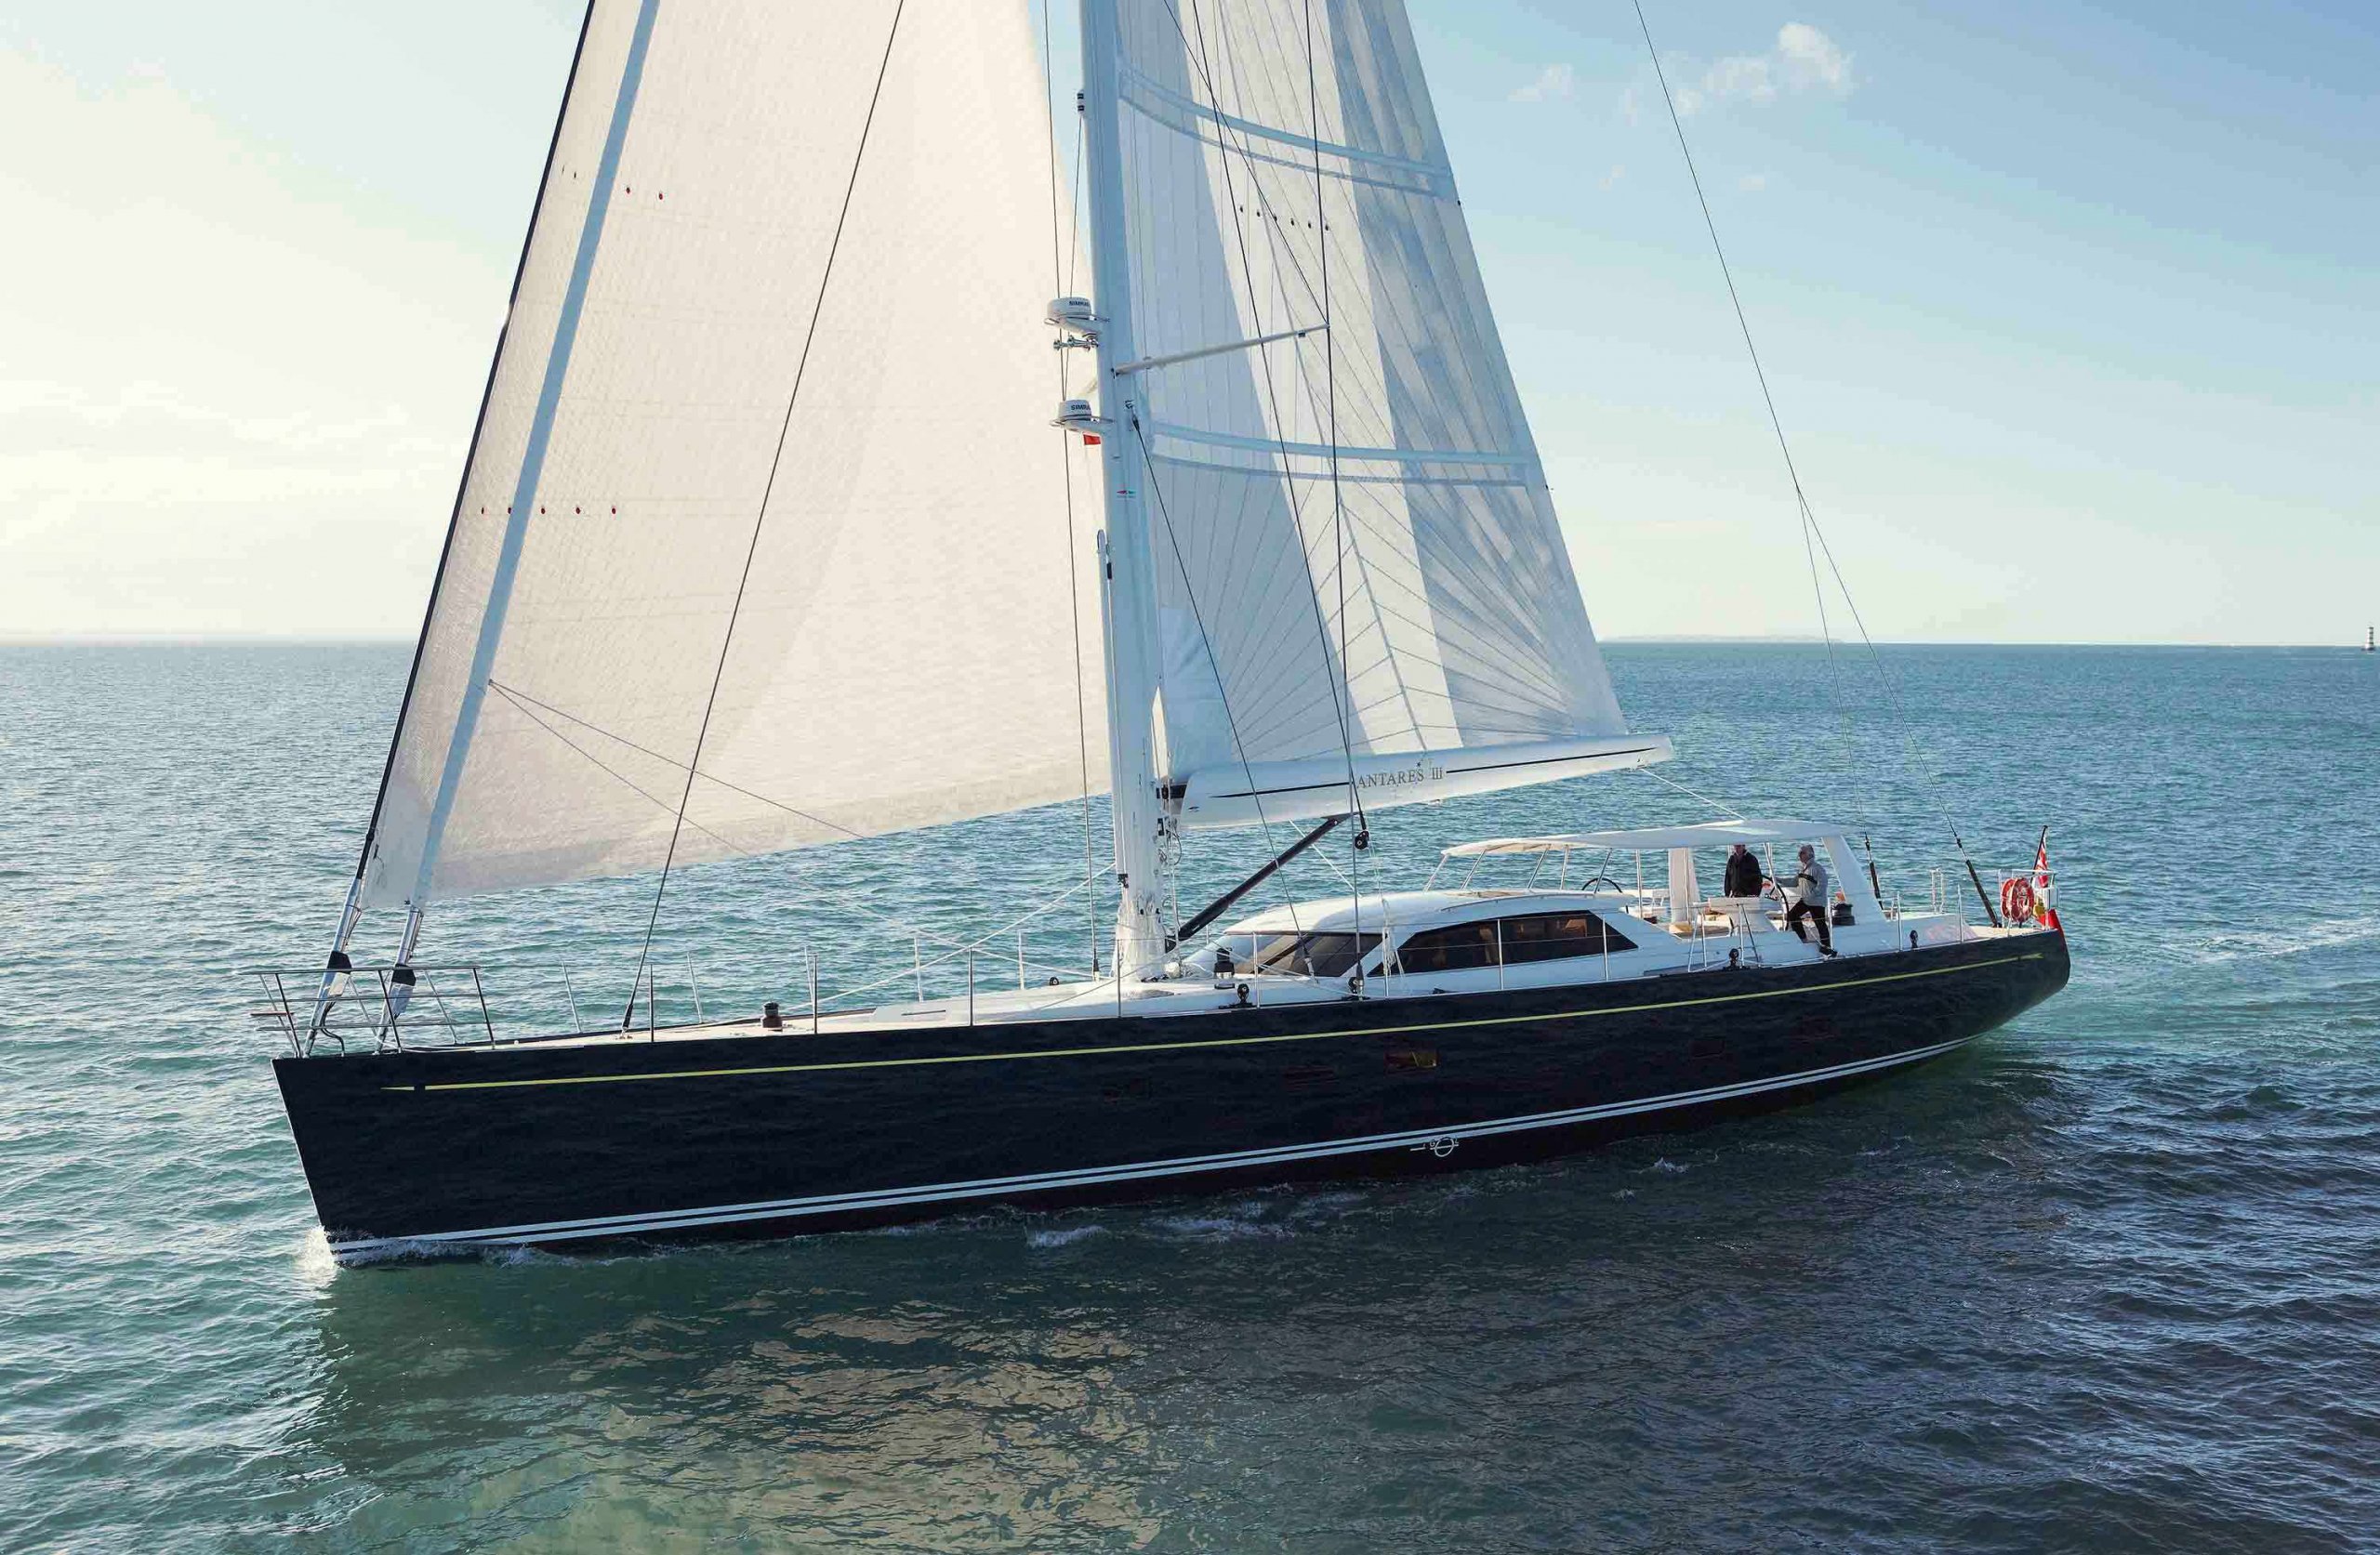 Voile Yacht Antares III - Yachting Developments - 2011 - A vendre - A louer